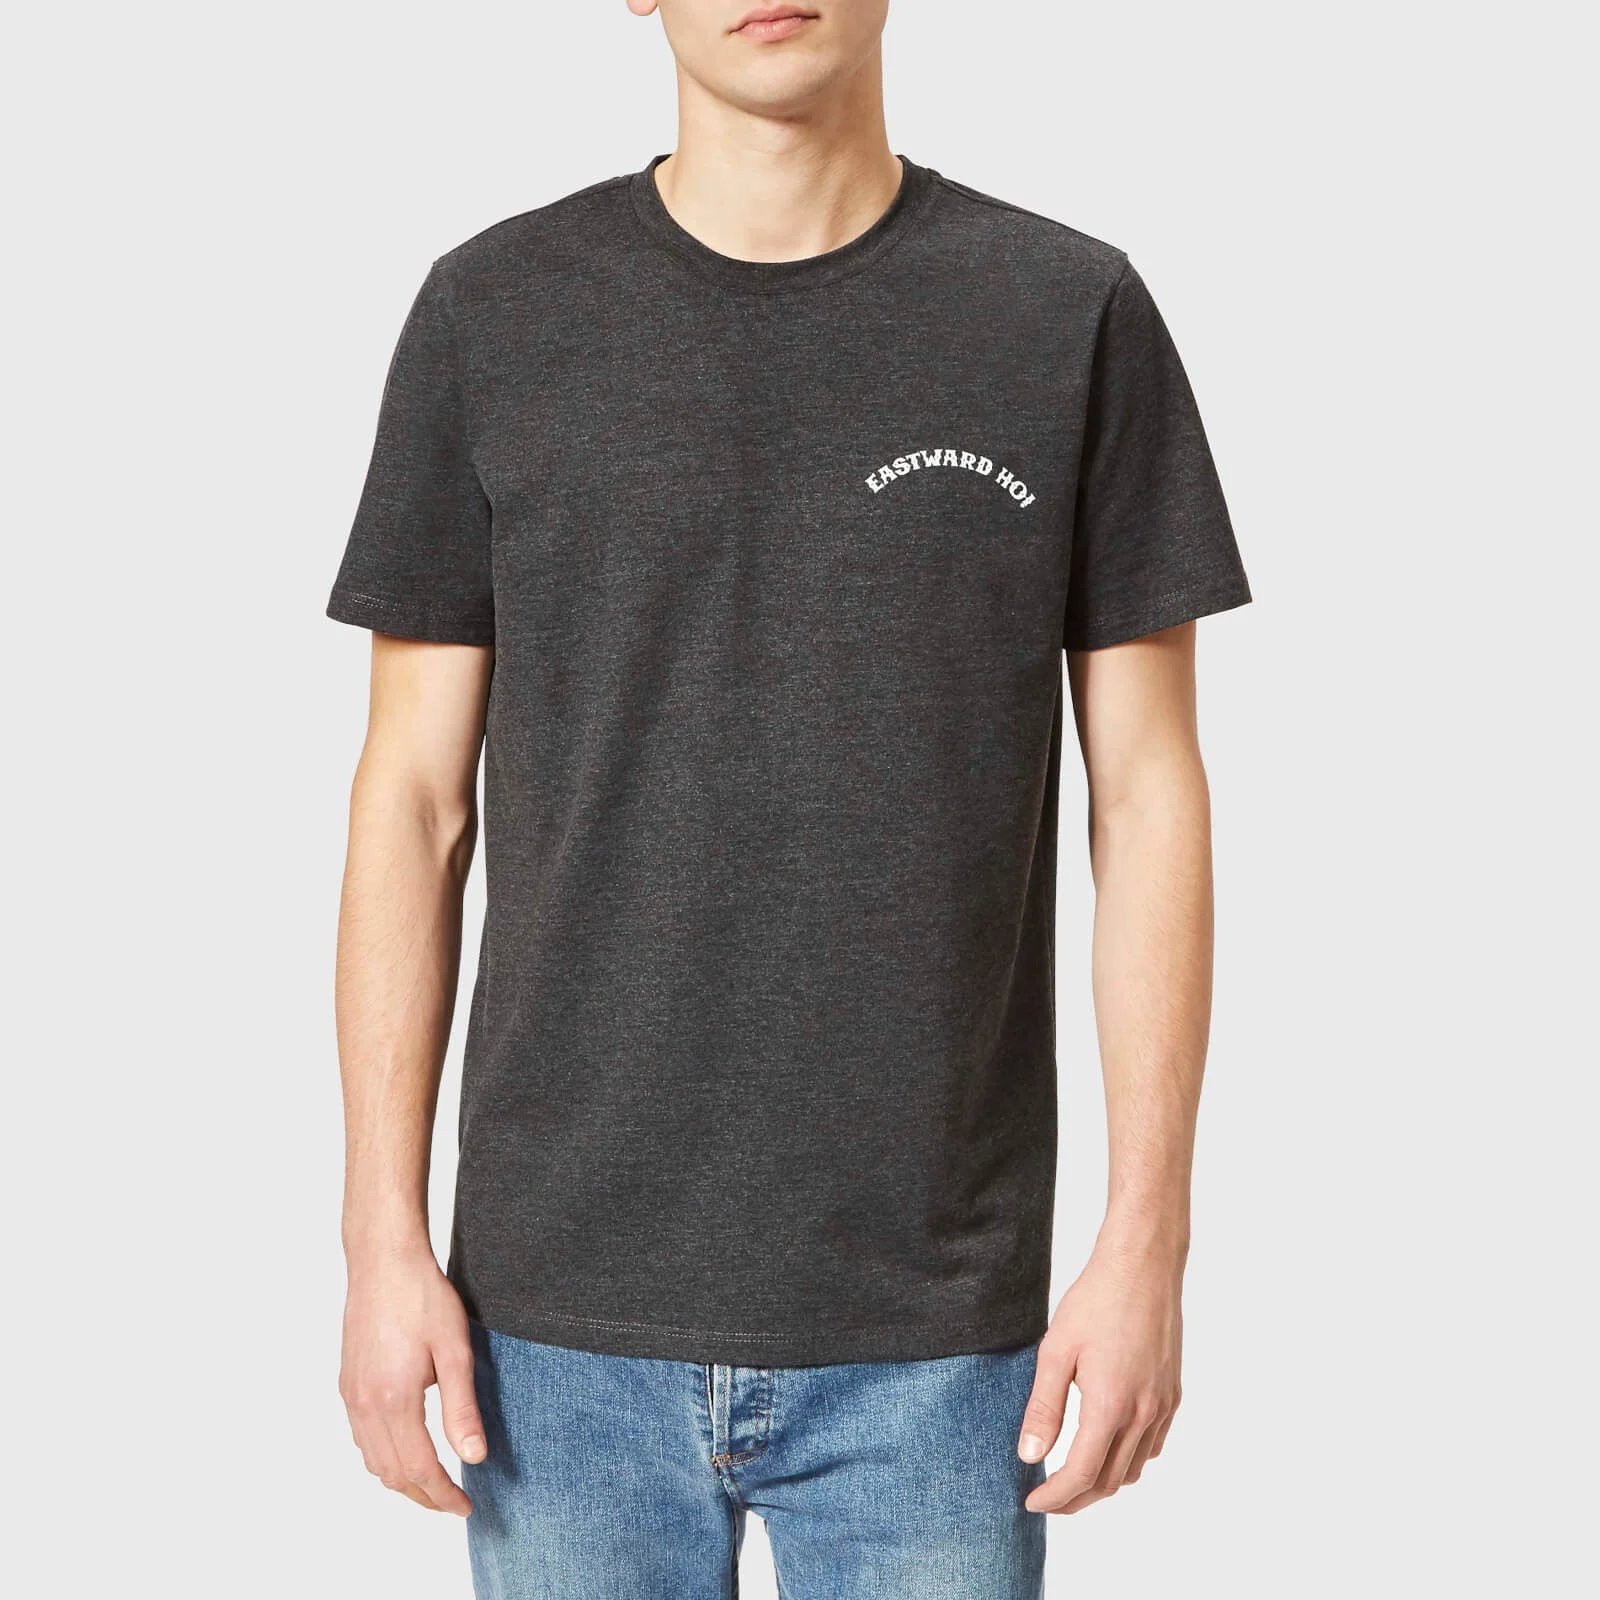 A.P.C. Men's Eastward Oh! T-Shirt - Anthracite Chine Image 1